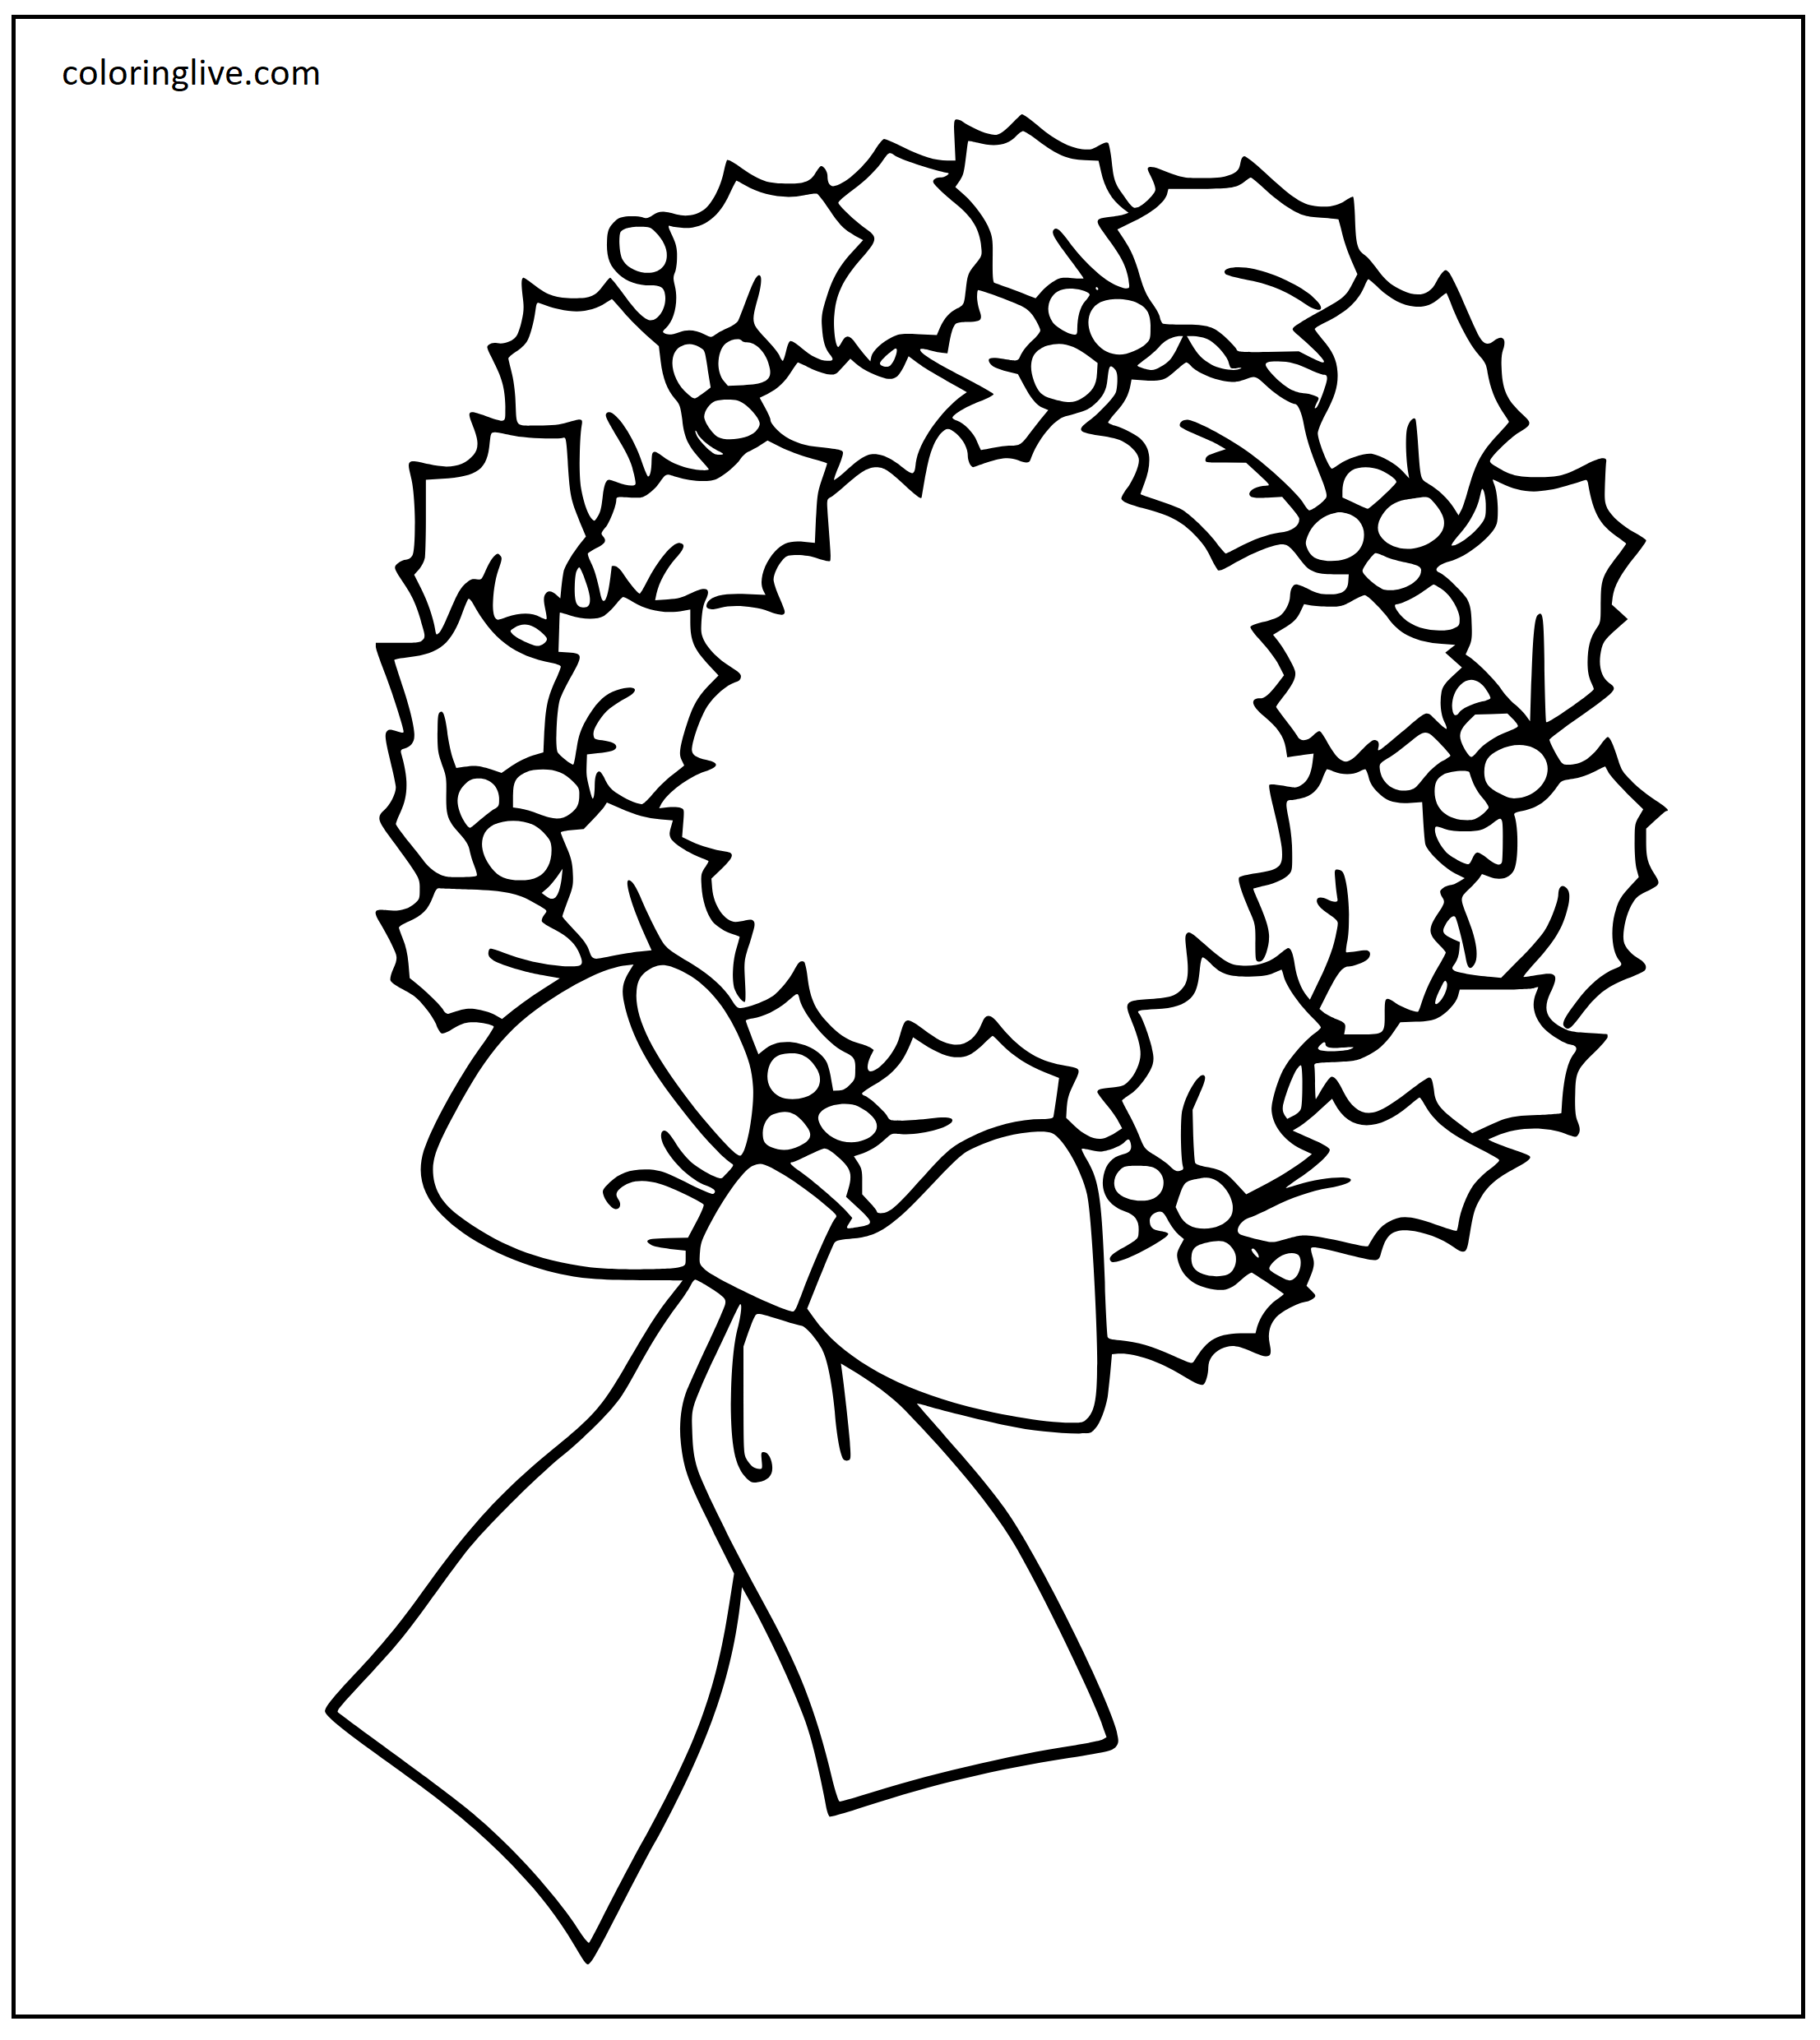 Printable Christmas Wreath for Coloring Page for kids.